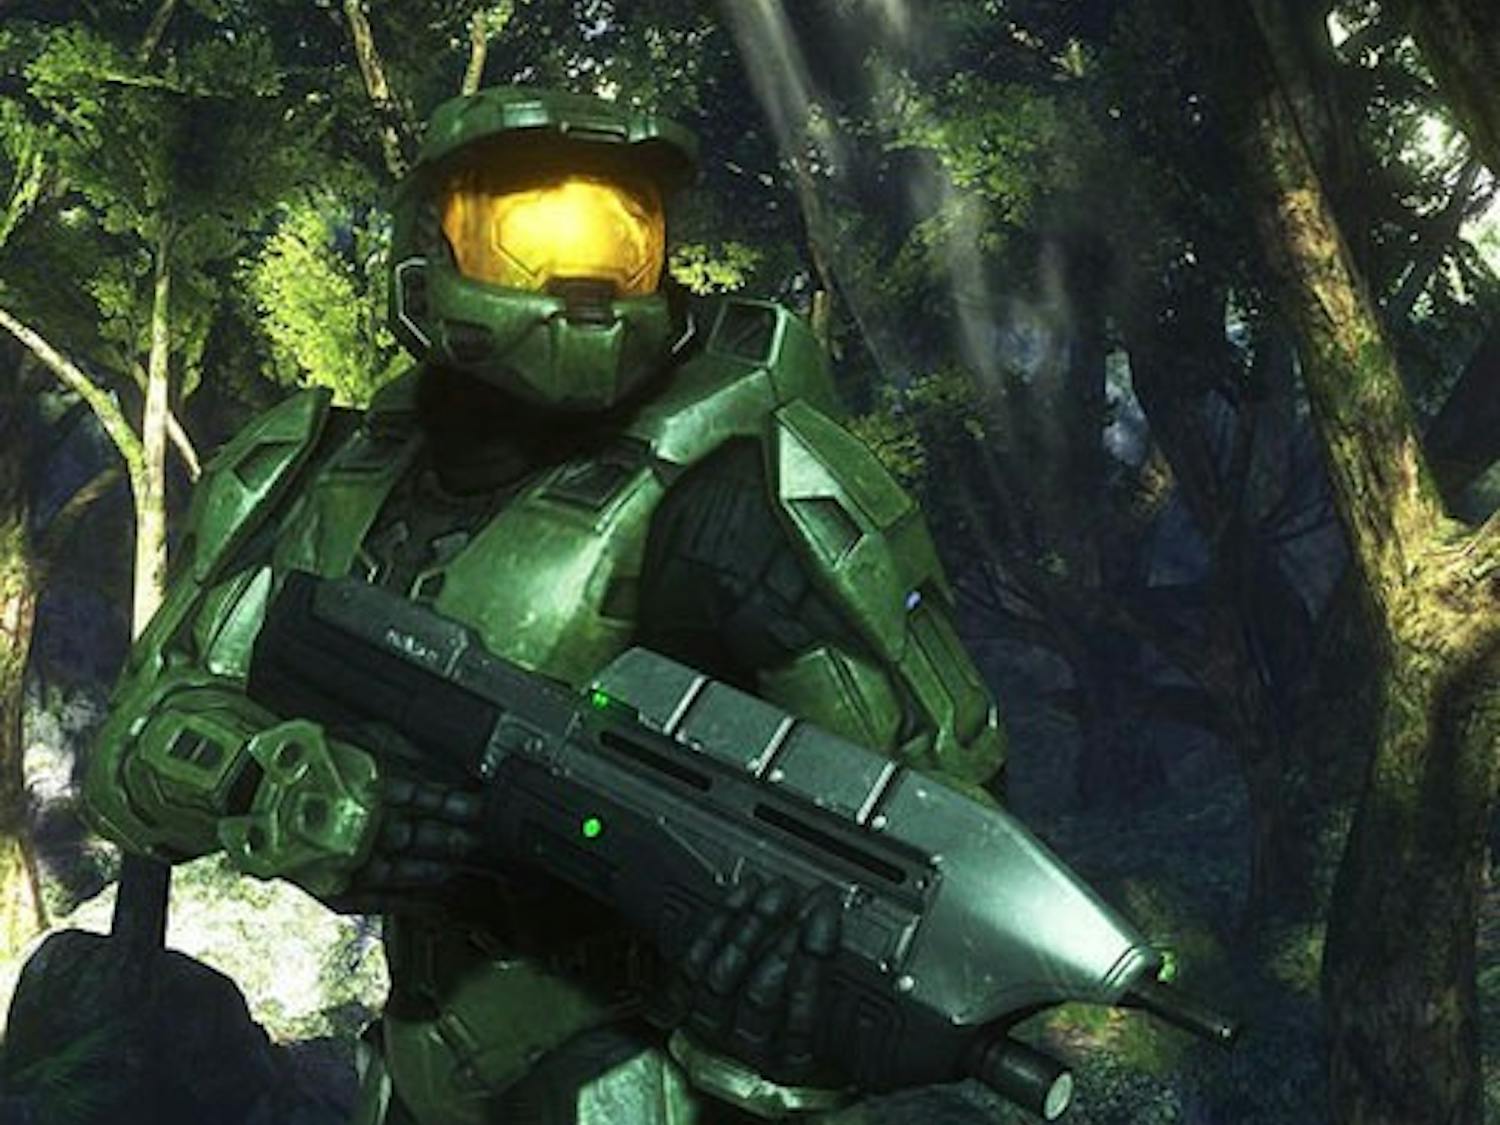 'Halo 3' meets expectations of loyal fans